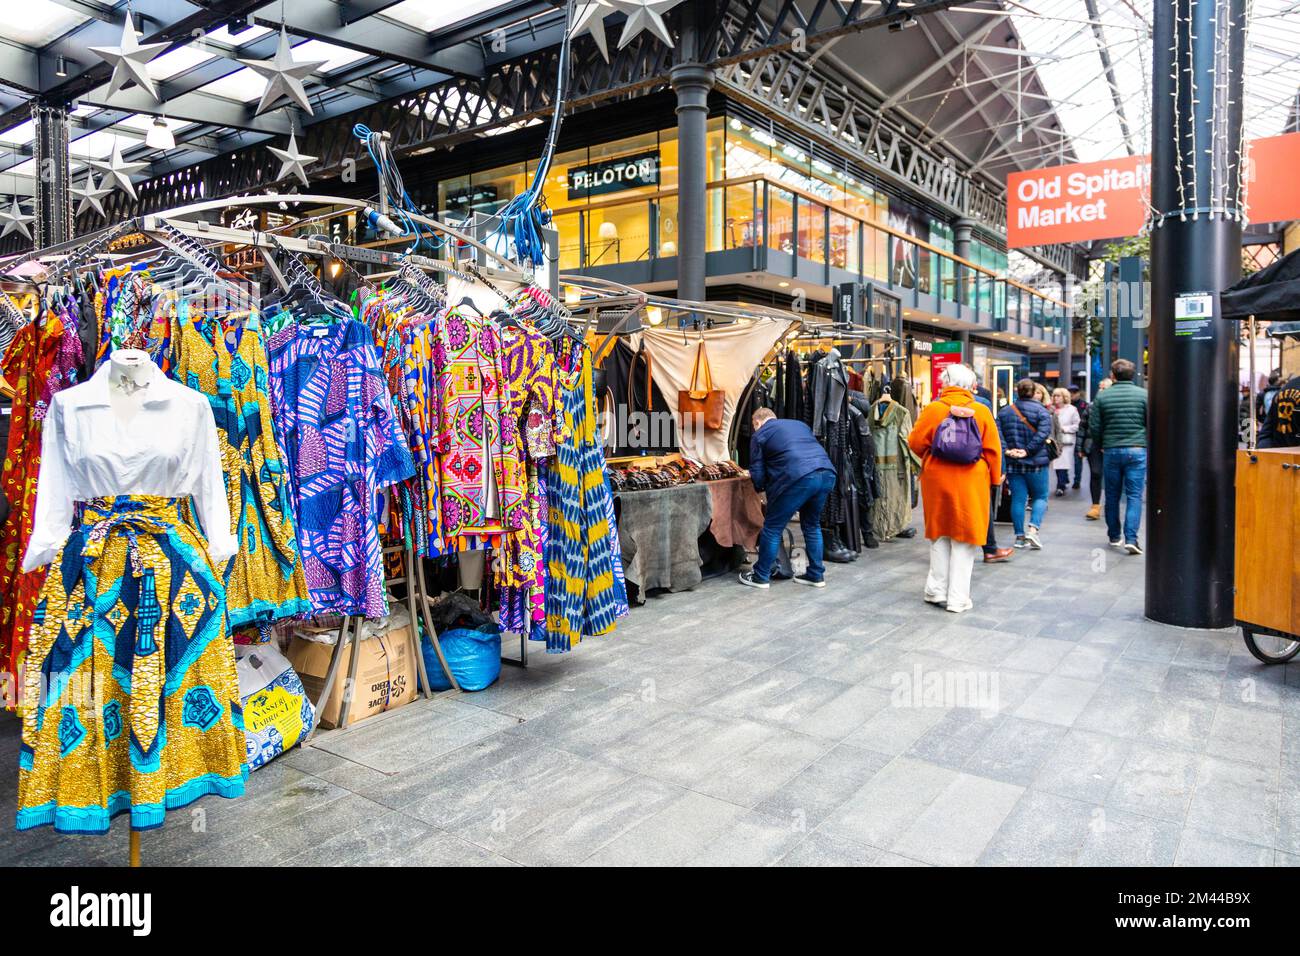 Stalls with clothing and accessories at Spitalfields Market, London, UK Stock Photo